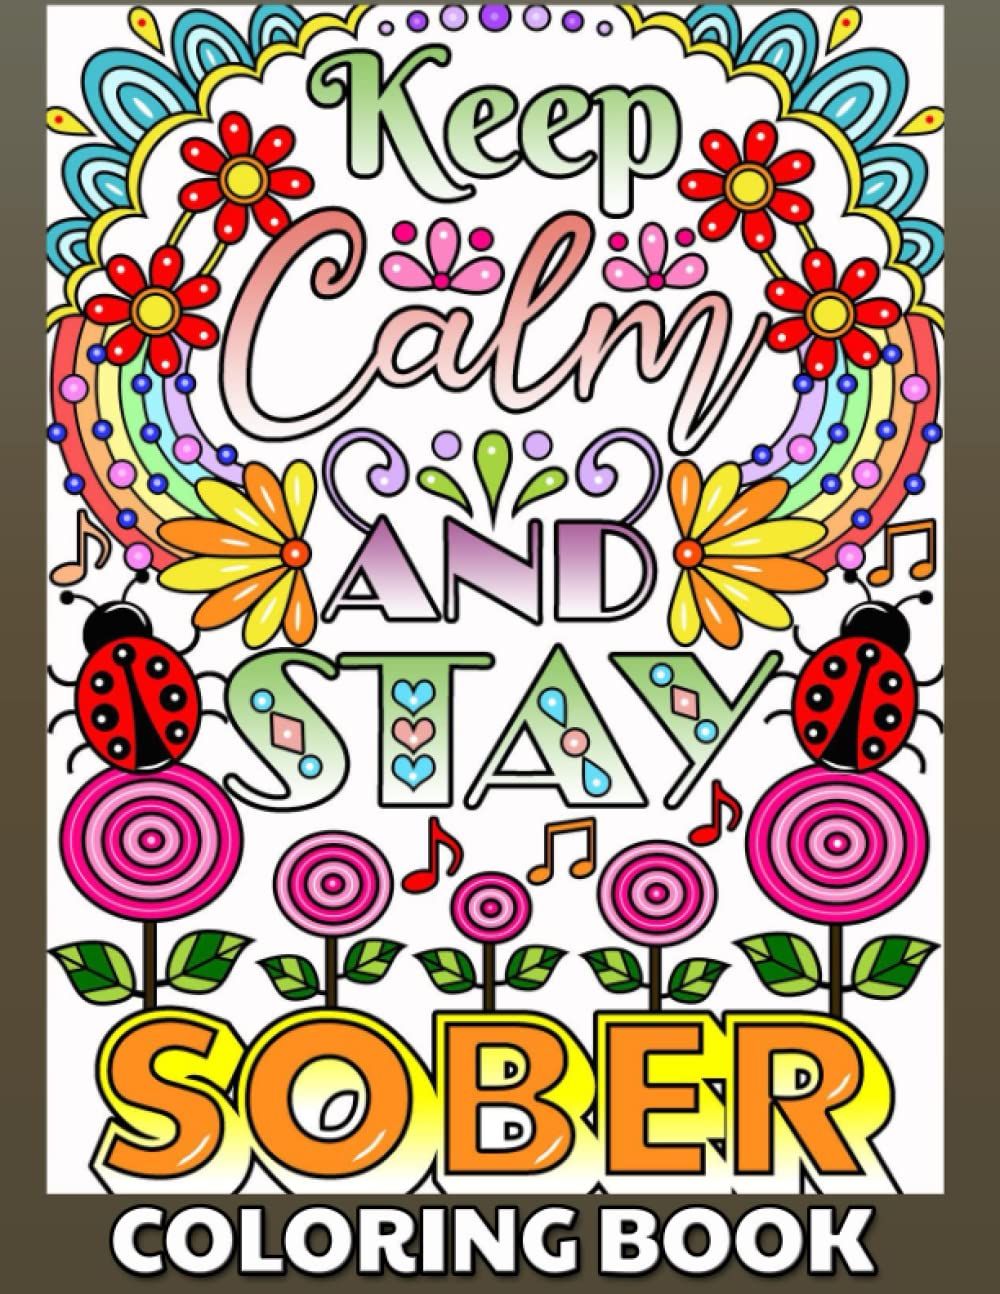 Keep Calm And Stay Sober Coloring Book